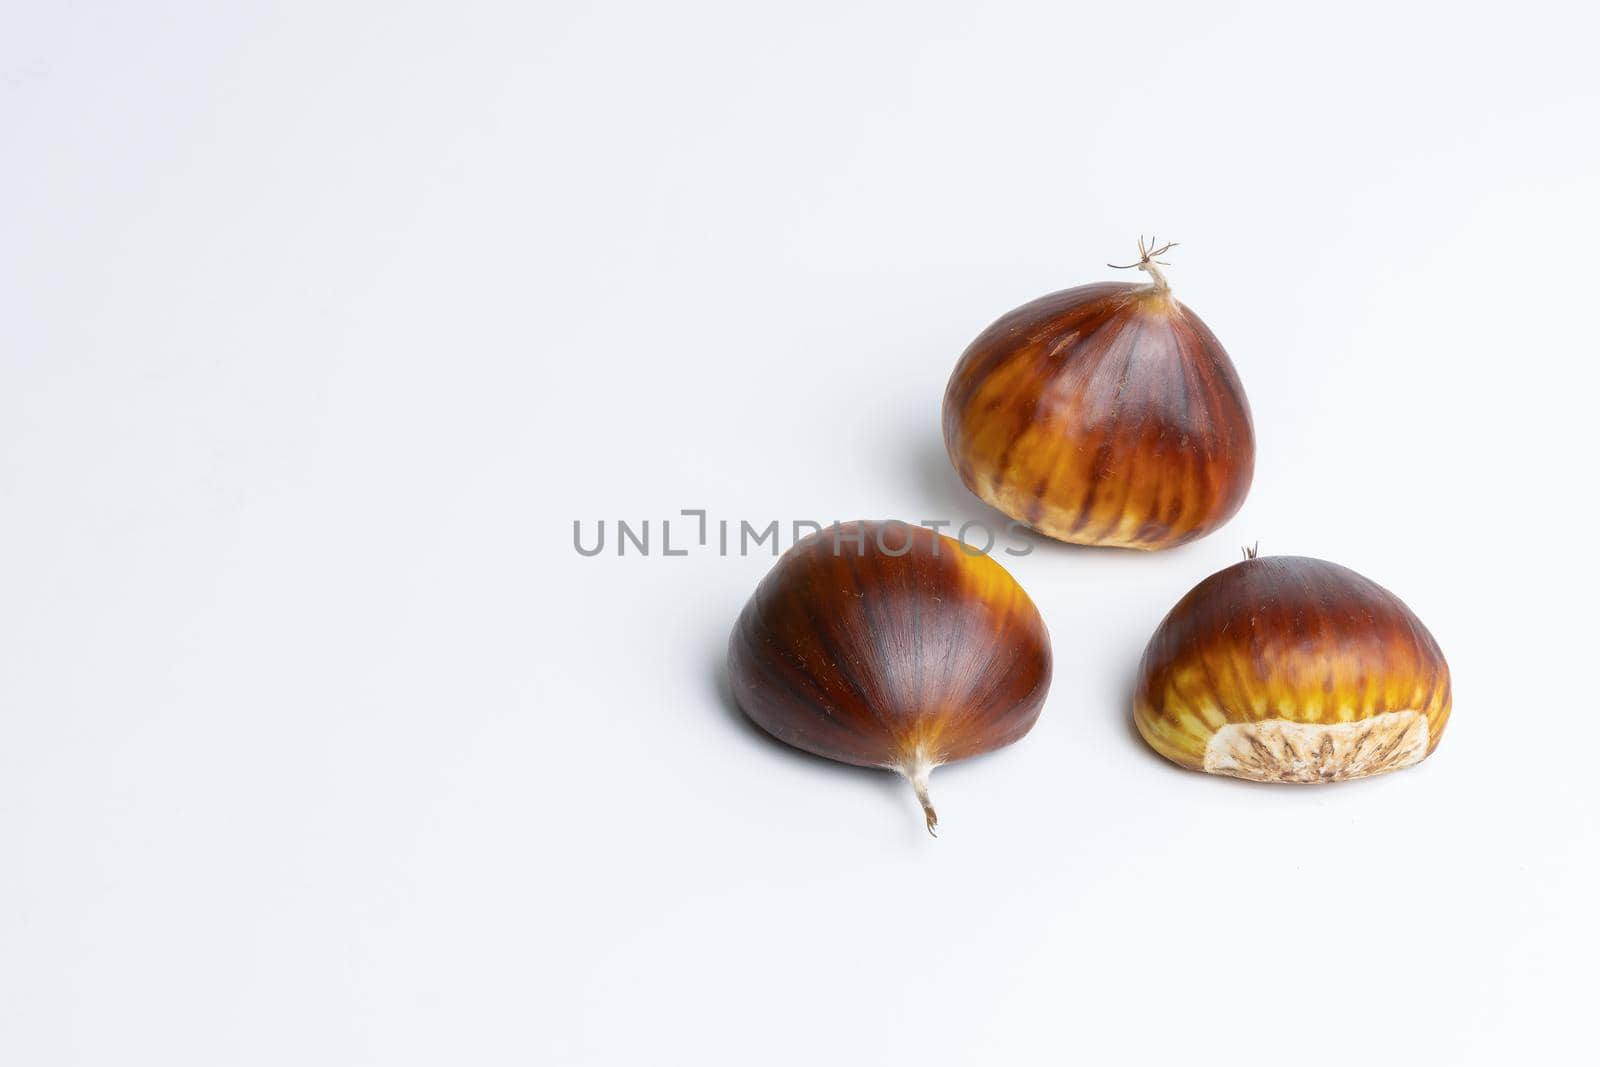 seasonal chestnuts harvested from the field on a white background